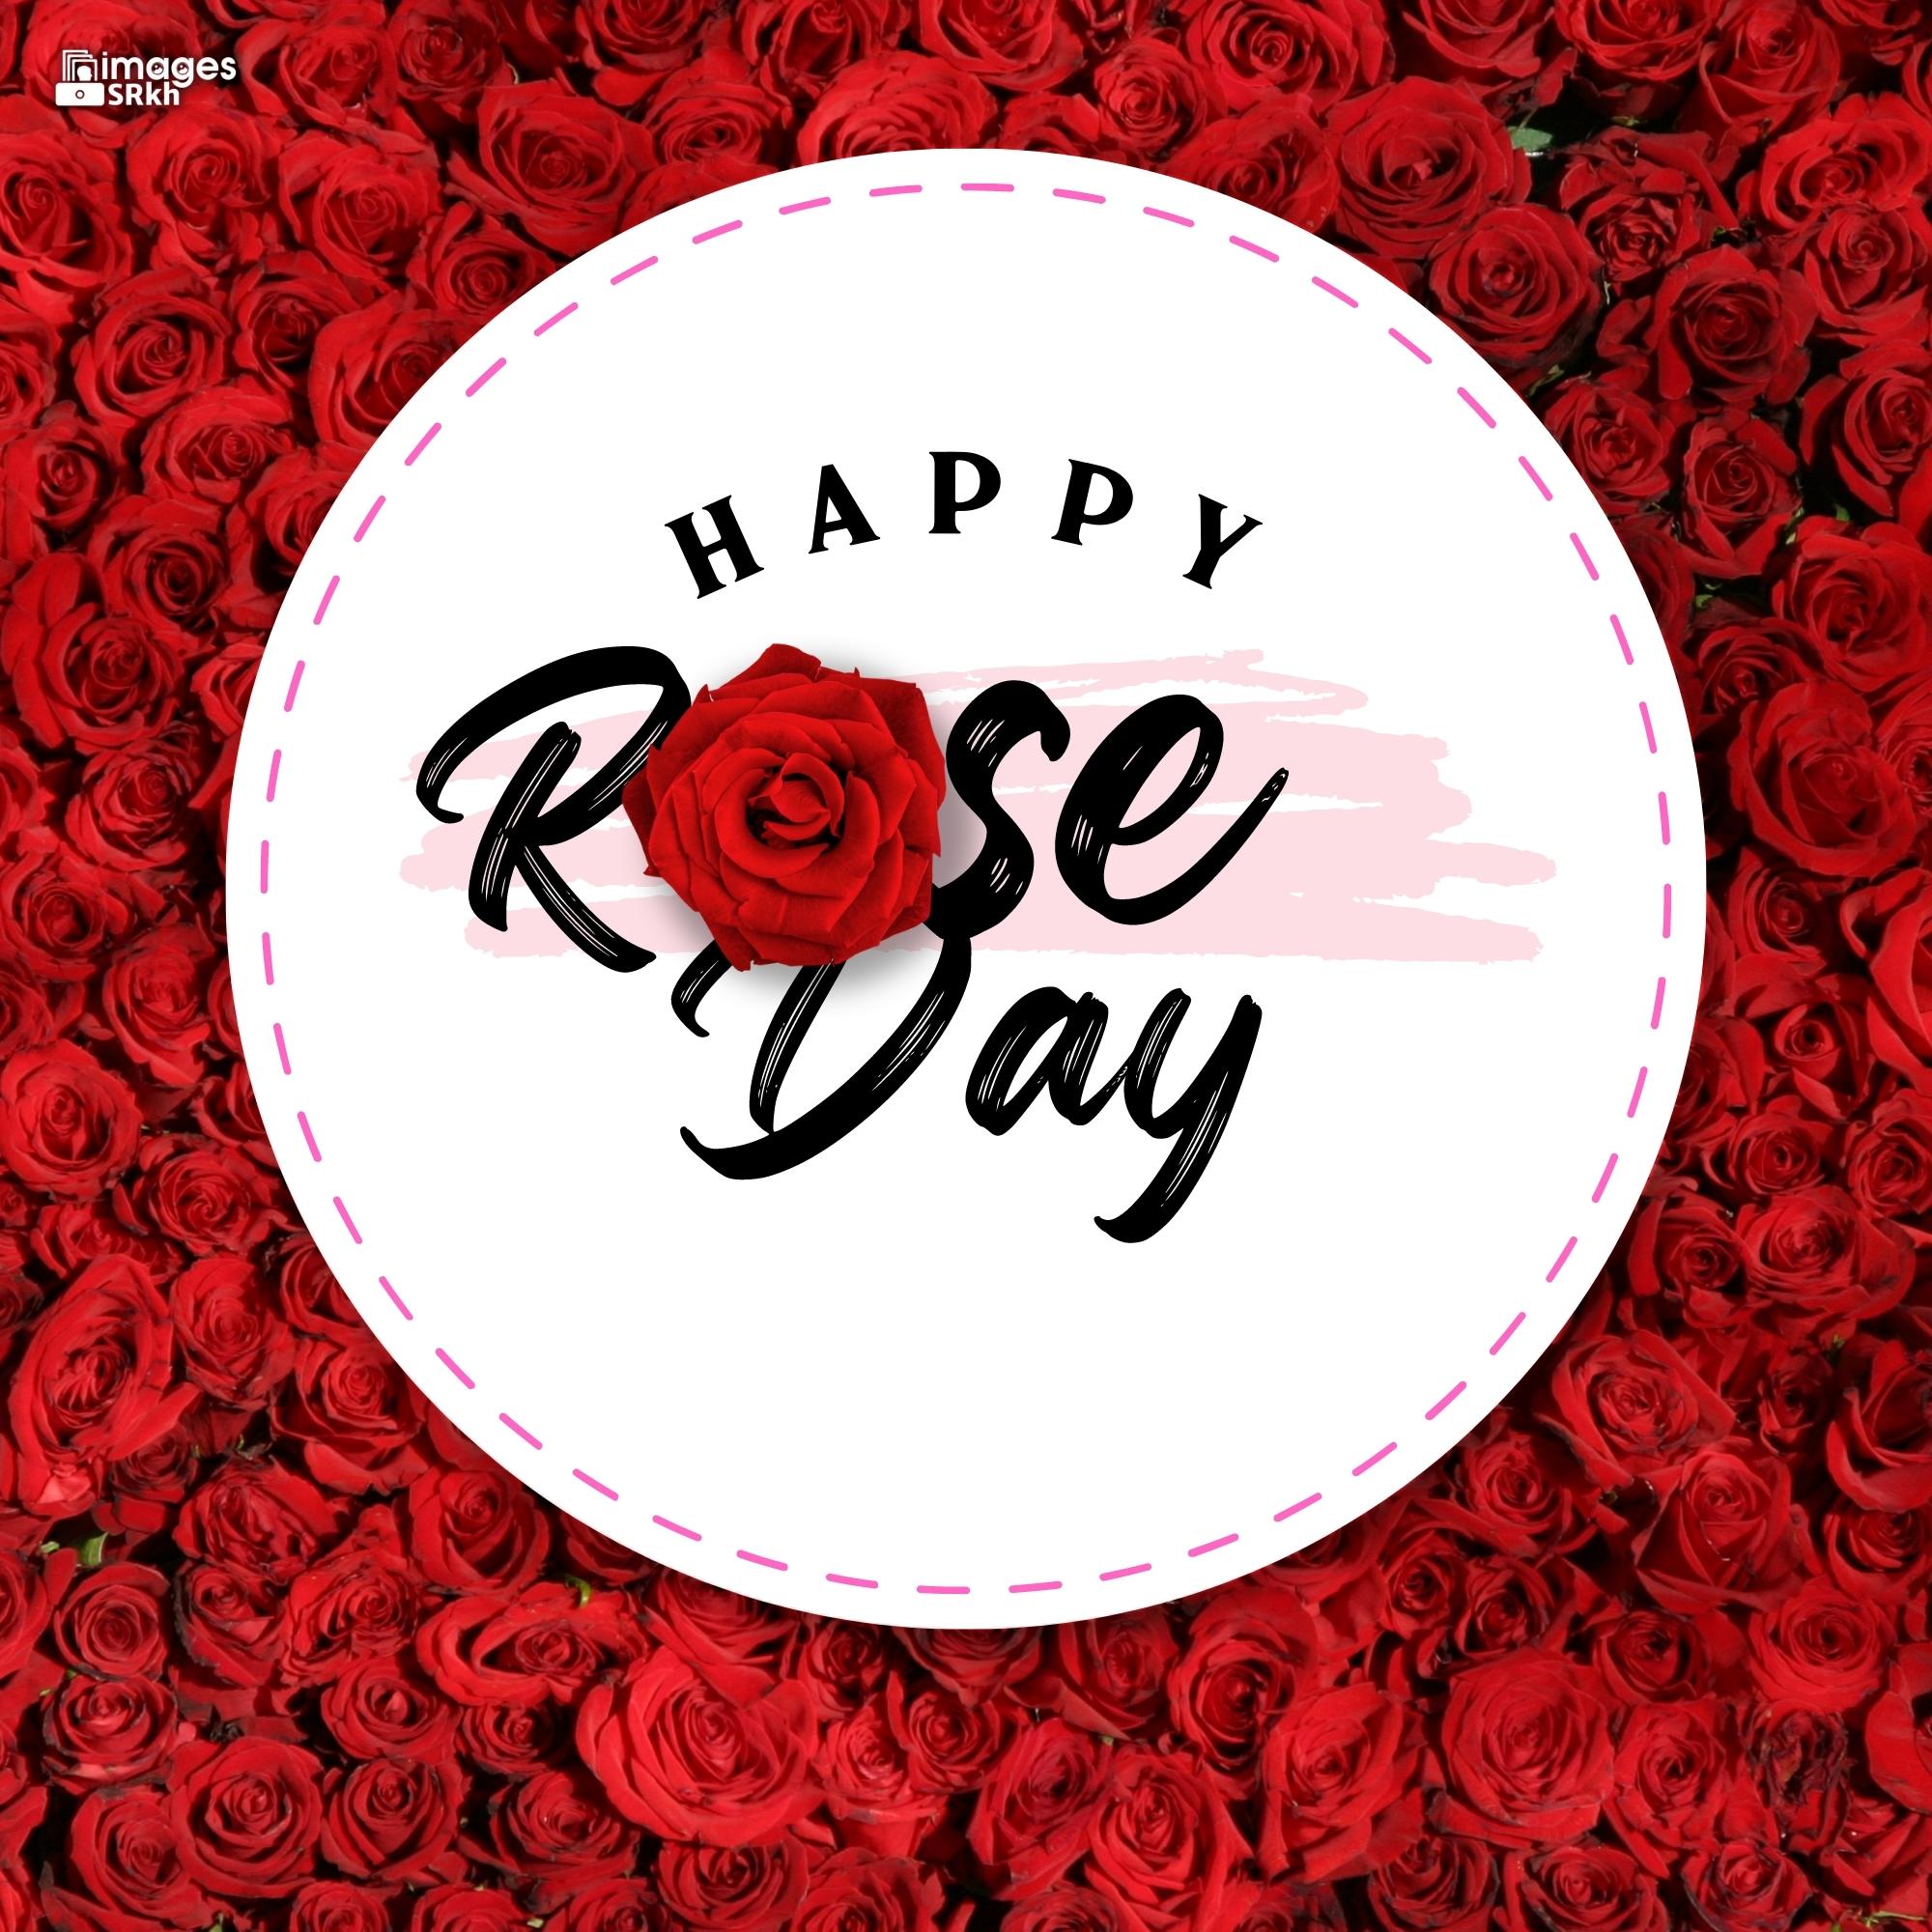 Happy Rose Day Image Hd Download (52)